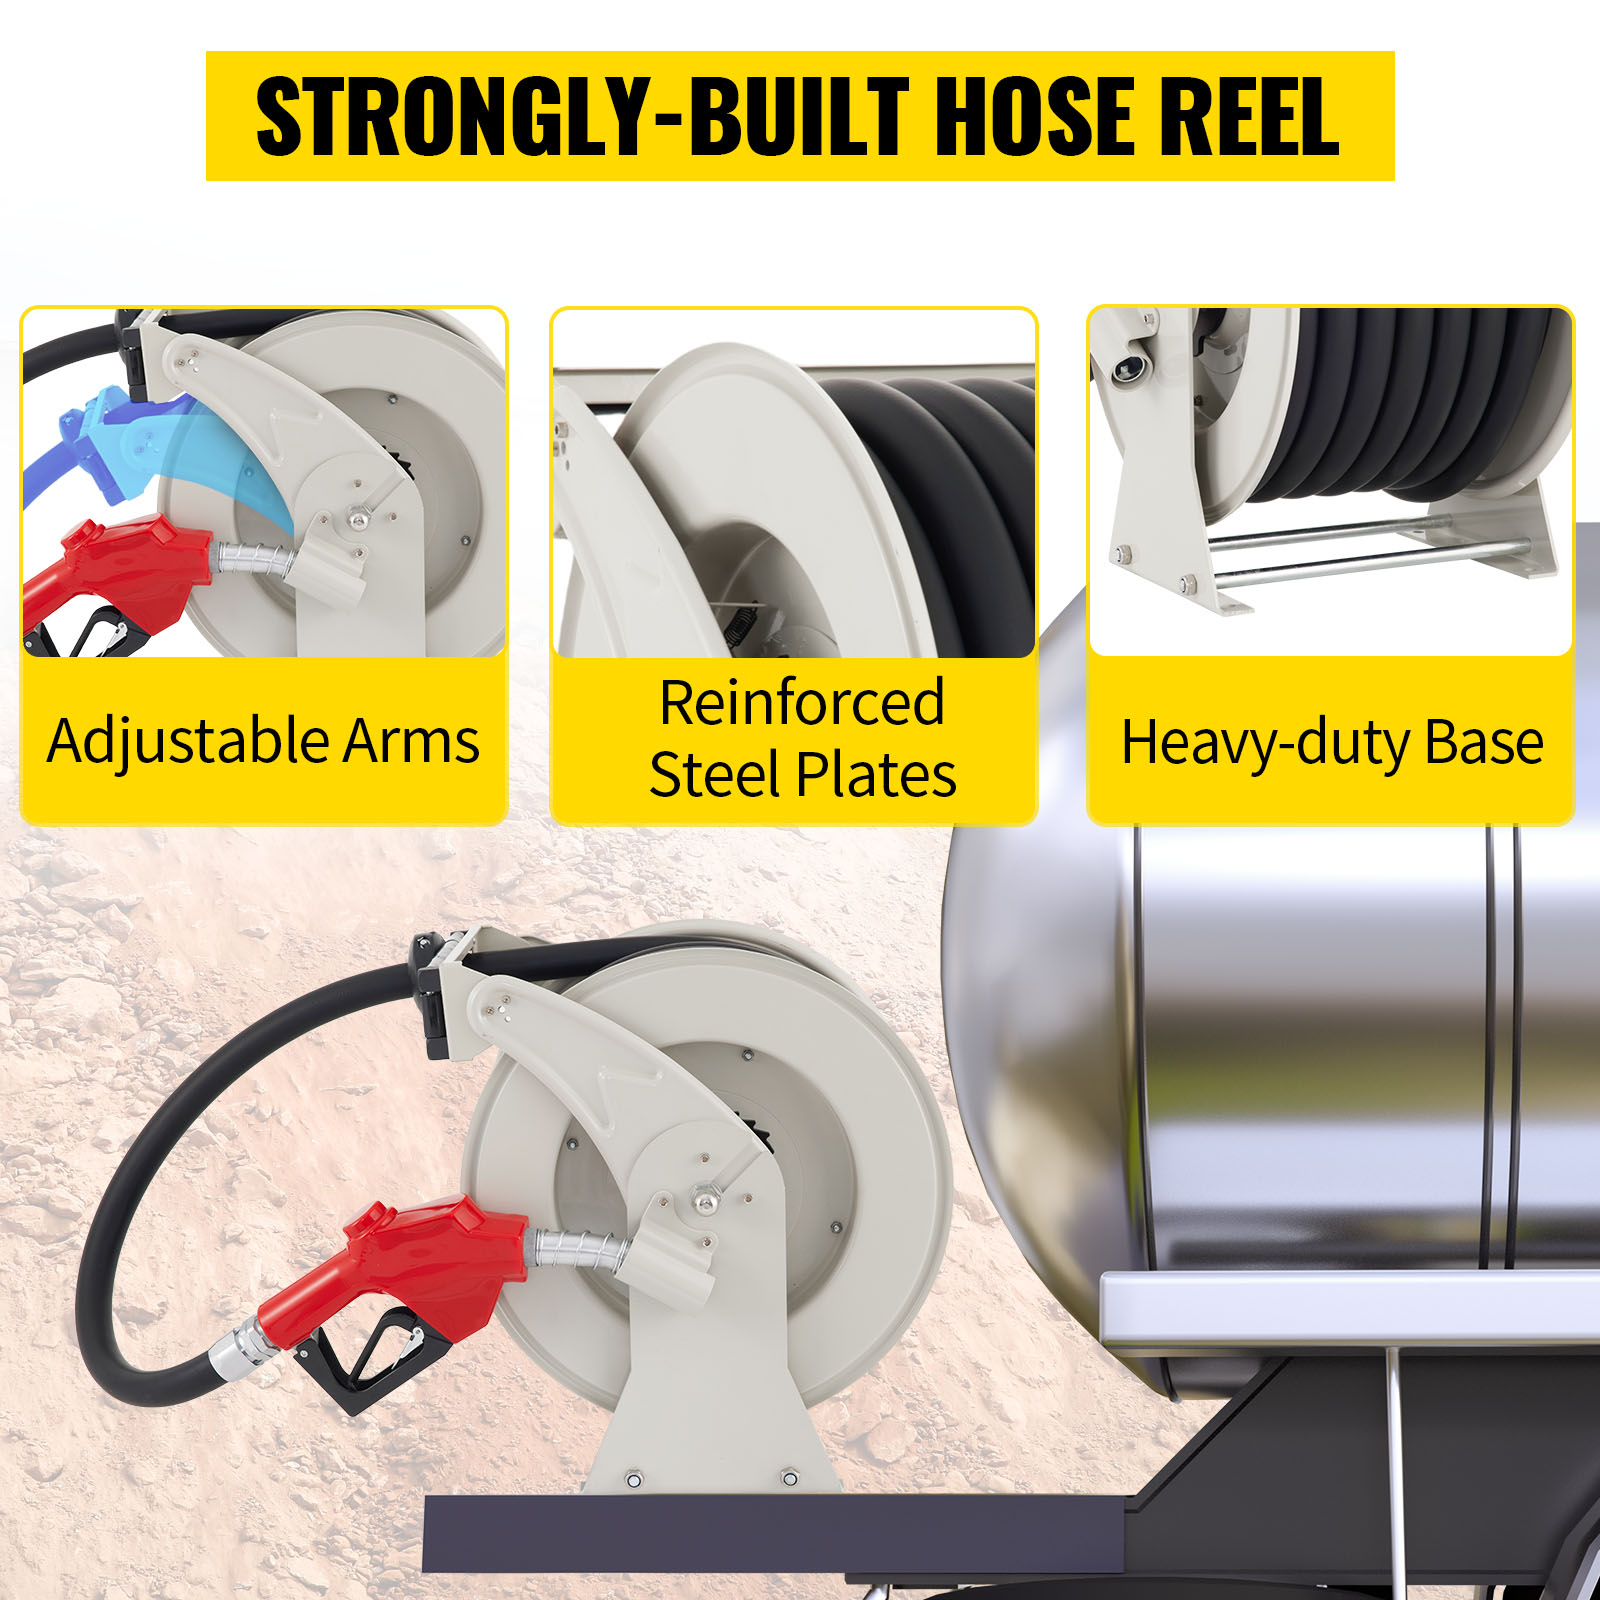 VEVOR Fuel Hose Reel, 3/4 x 66' Extra Long Retractable Diesel Hose Reel,  Heavy-duty Steel Construction with Automatic Refueling Gun, Rubber Hose  Used